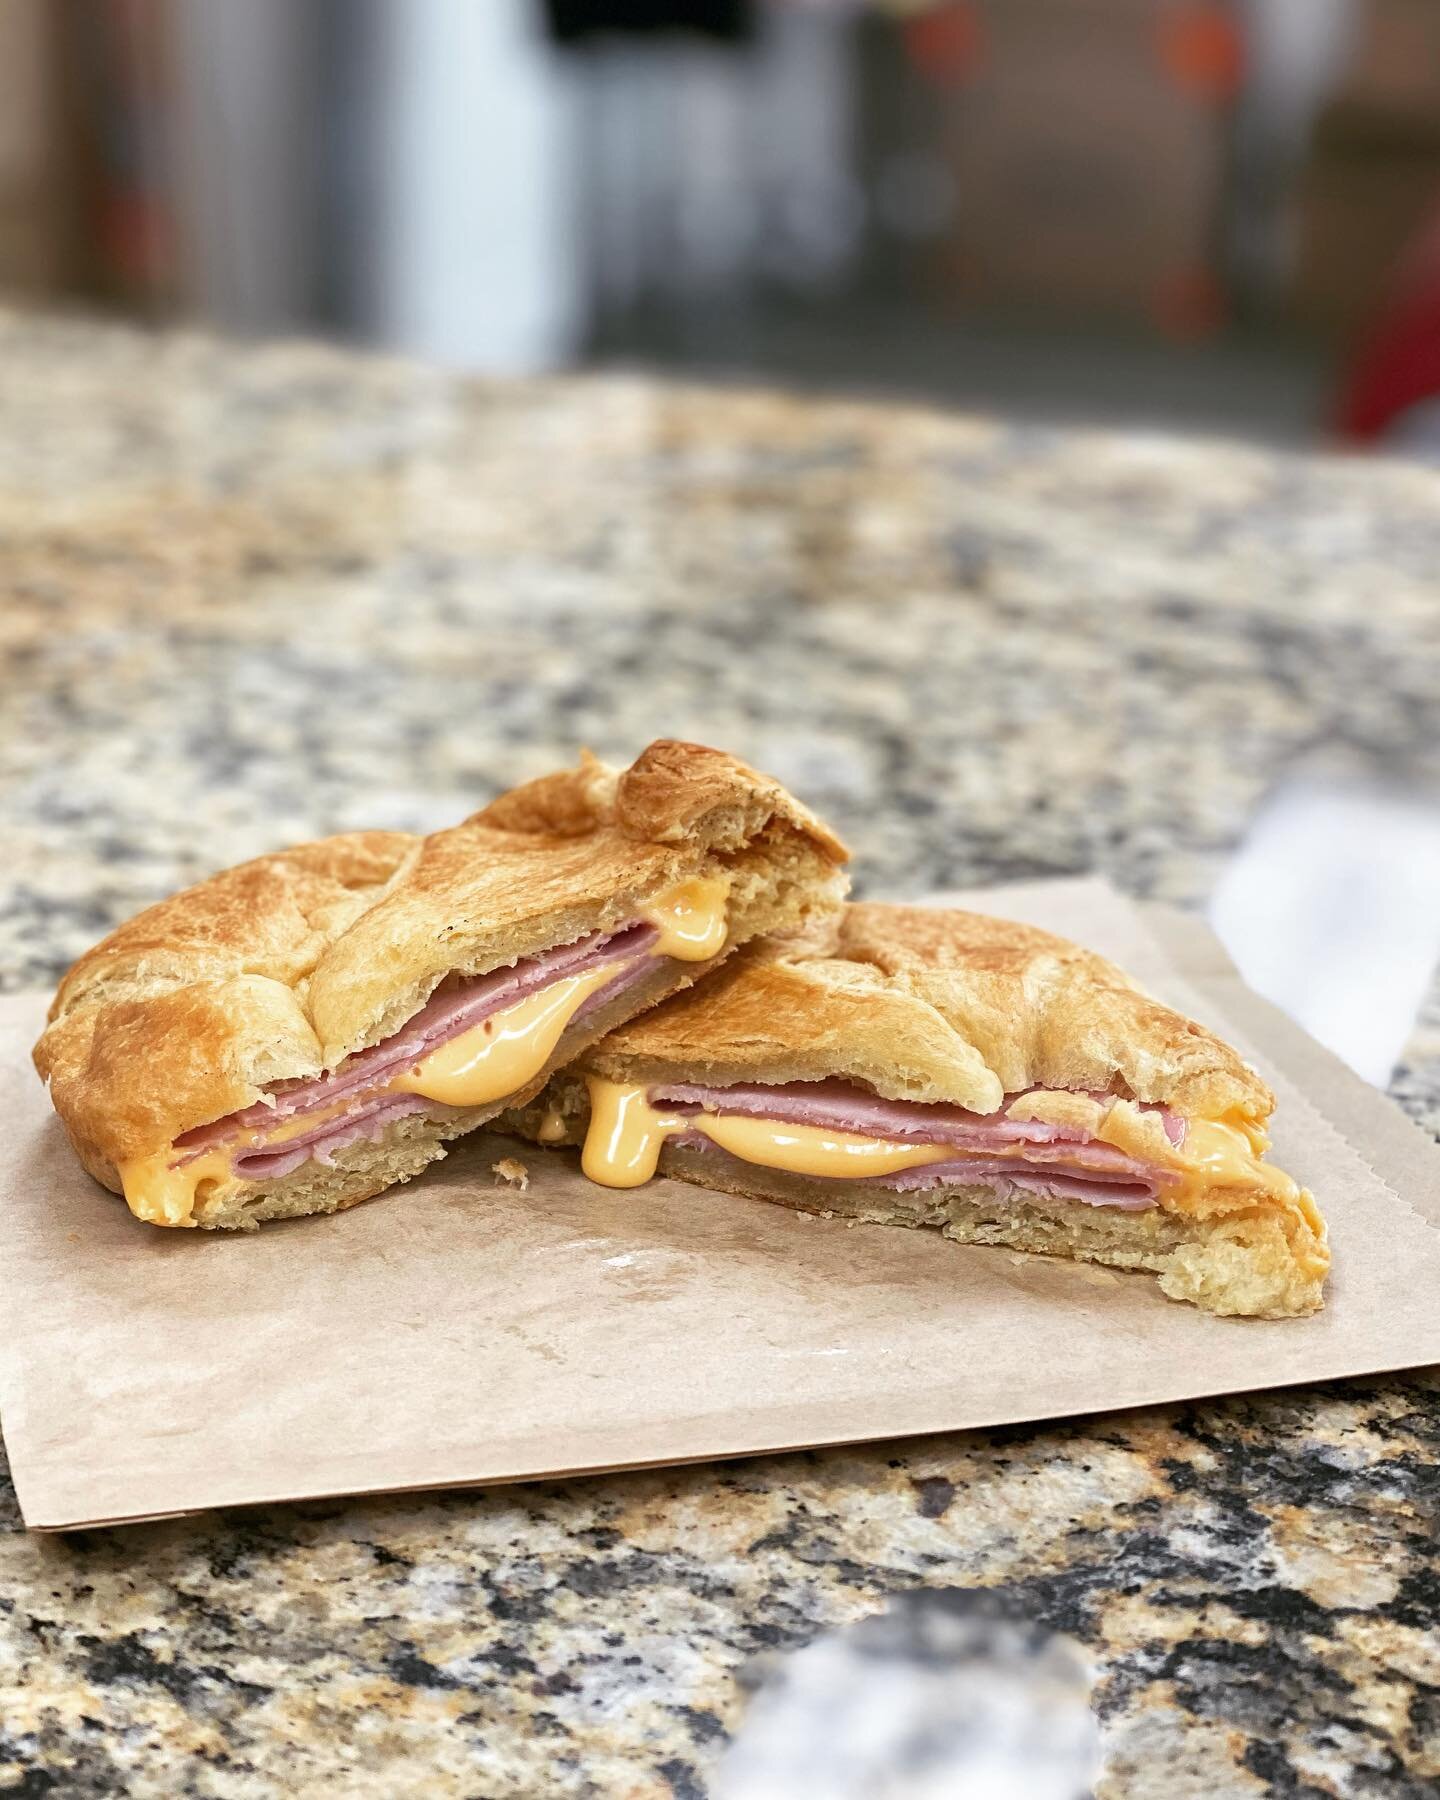 Have you tried our new Ham &amp; Cheese Croissant? The perfect combination of toasty and cheesy for an early morning breakfast or an afternoon snack! 🥐 
.
.
#leoscafe #leoscafeaz #williamsaz #williams #route66 #grandcanyon #coffee #barista #croissan